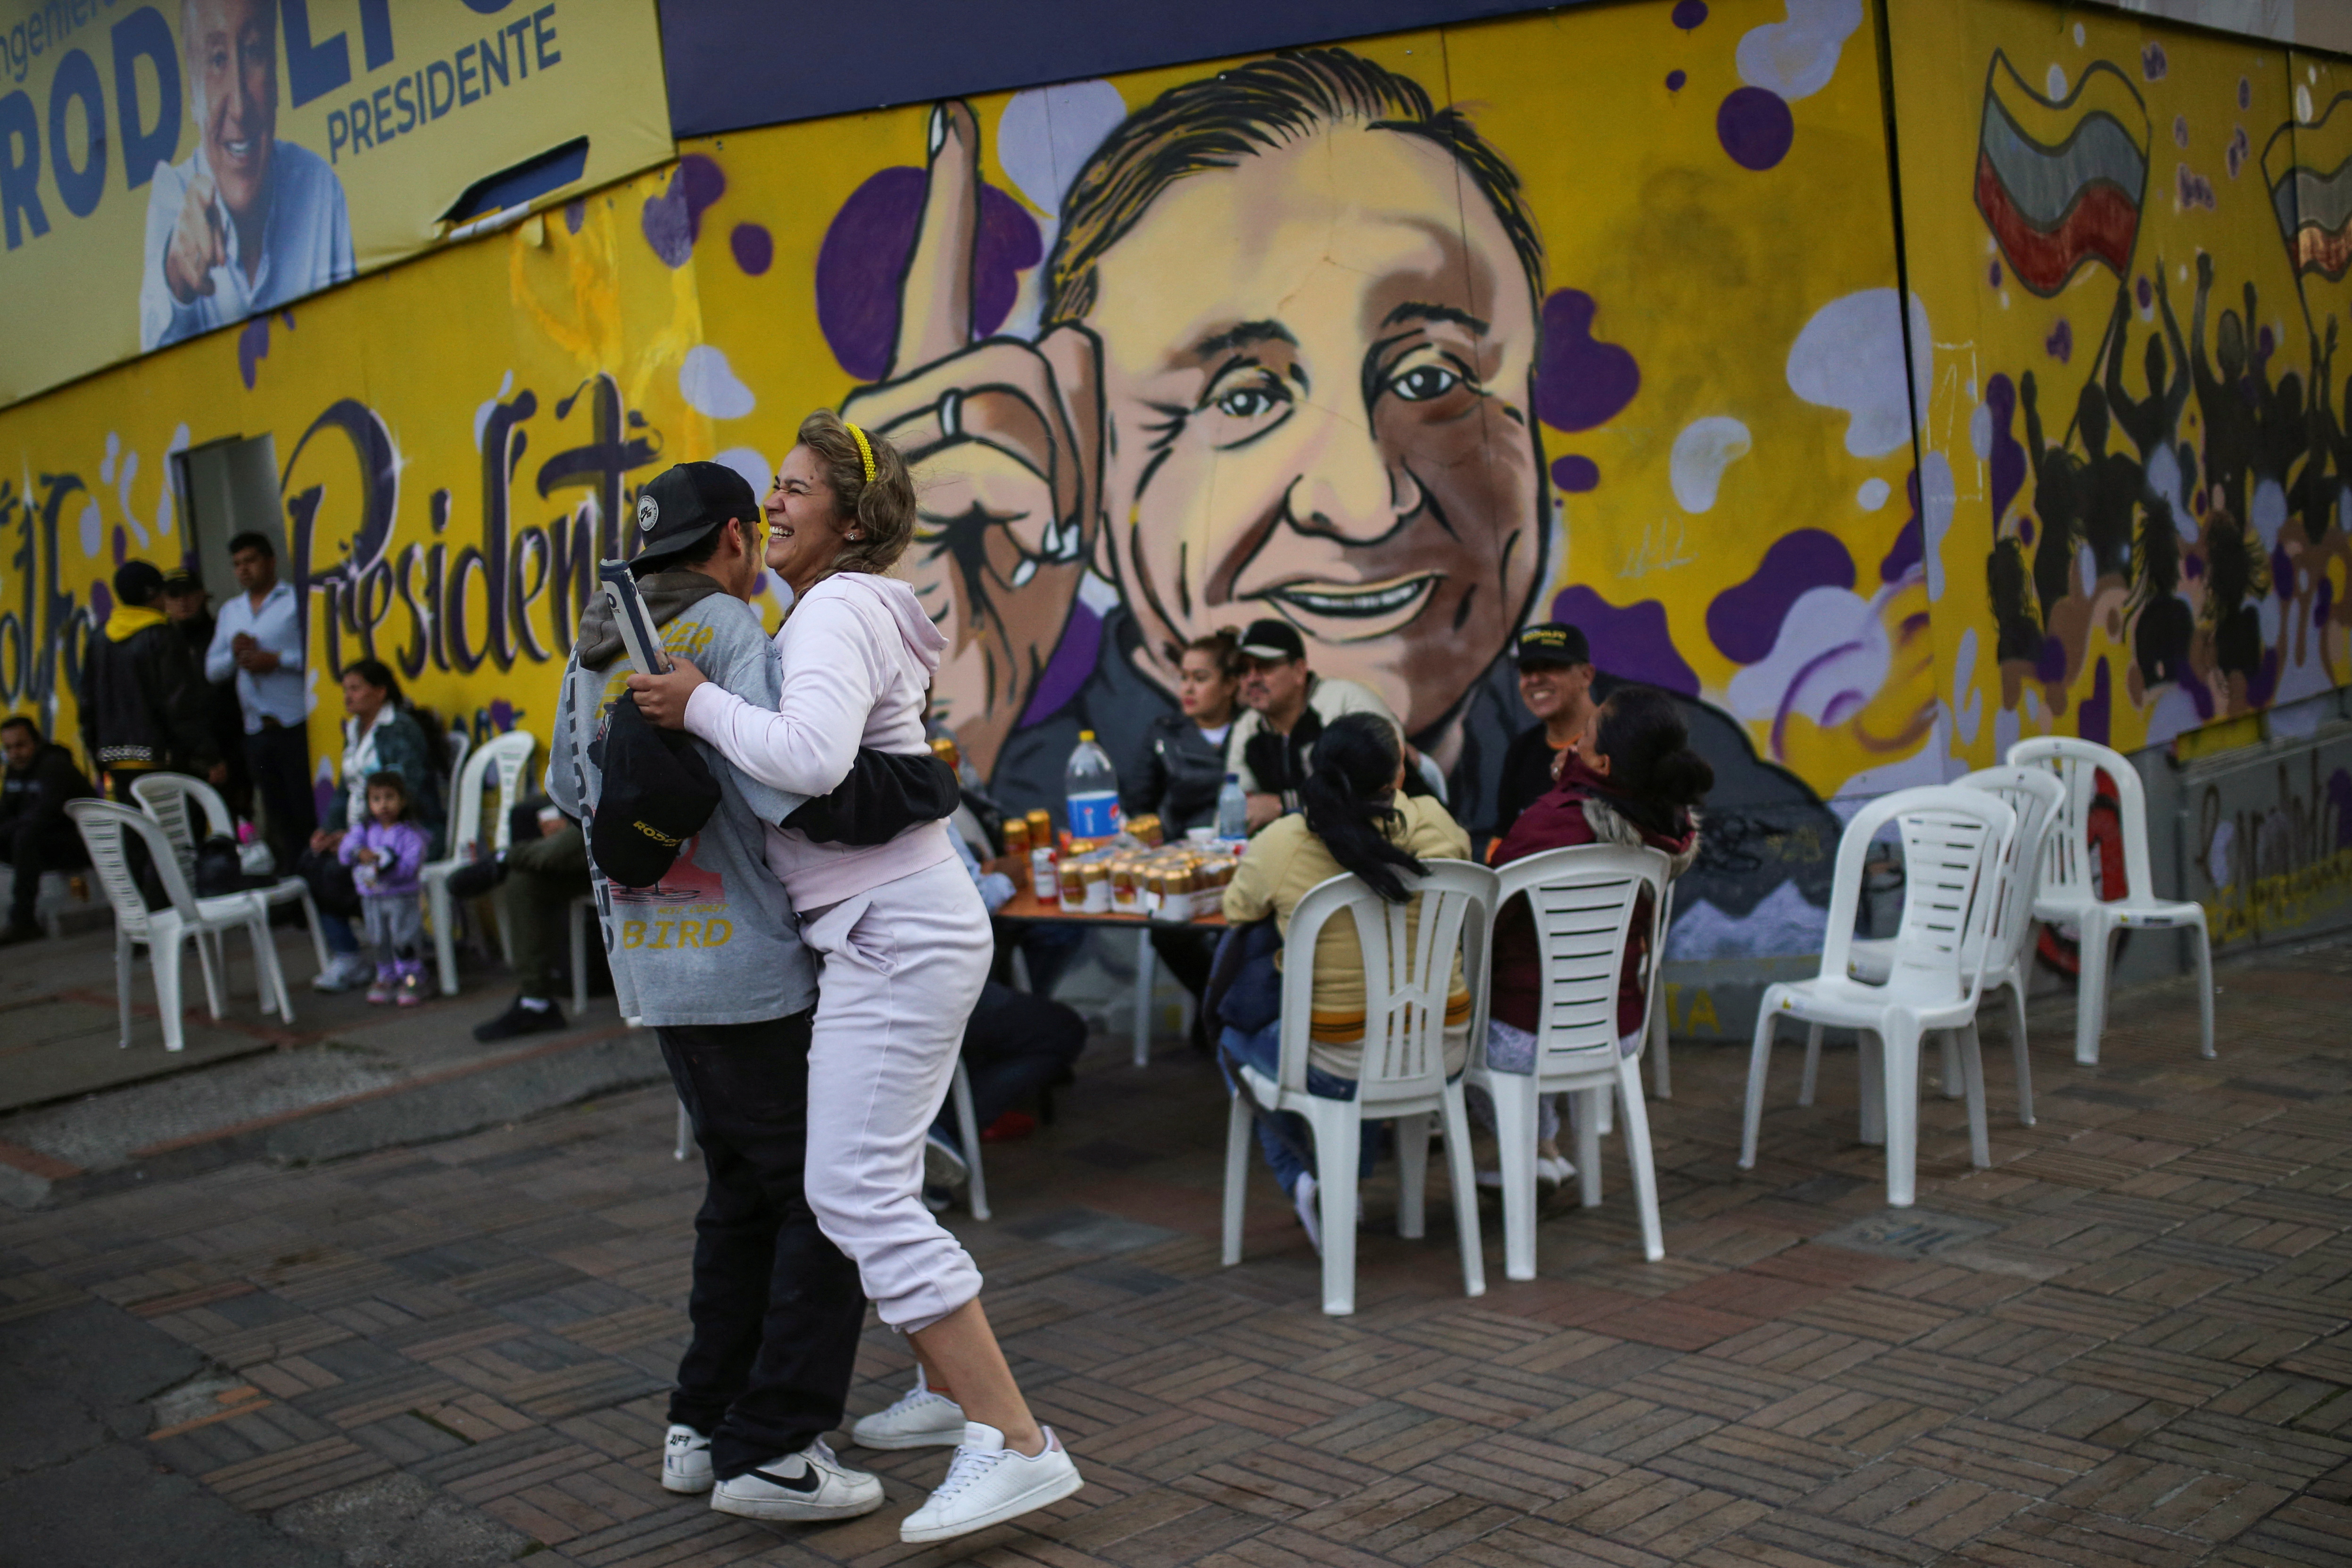 Supporters of Colombian centre-right presidential candidate Rodolfo Hernandez of Anti-Corruption Rulers' League Party gather after he came out second in the first round of the presidential election, in Bogota, Colombia May 30, 2022. REUTERS/Luisa Gonzalez